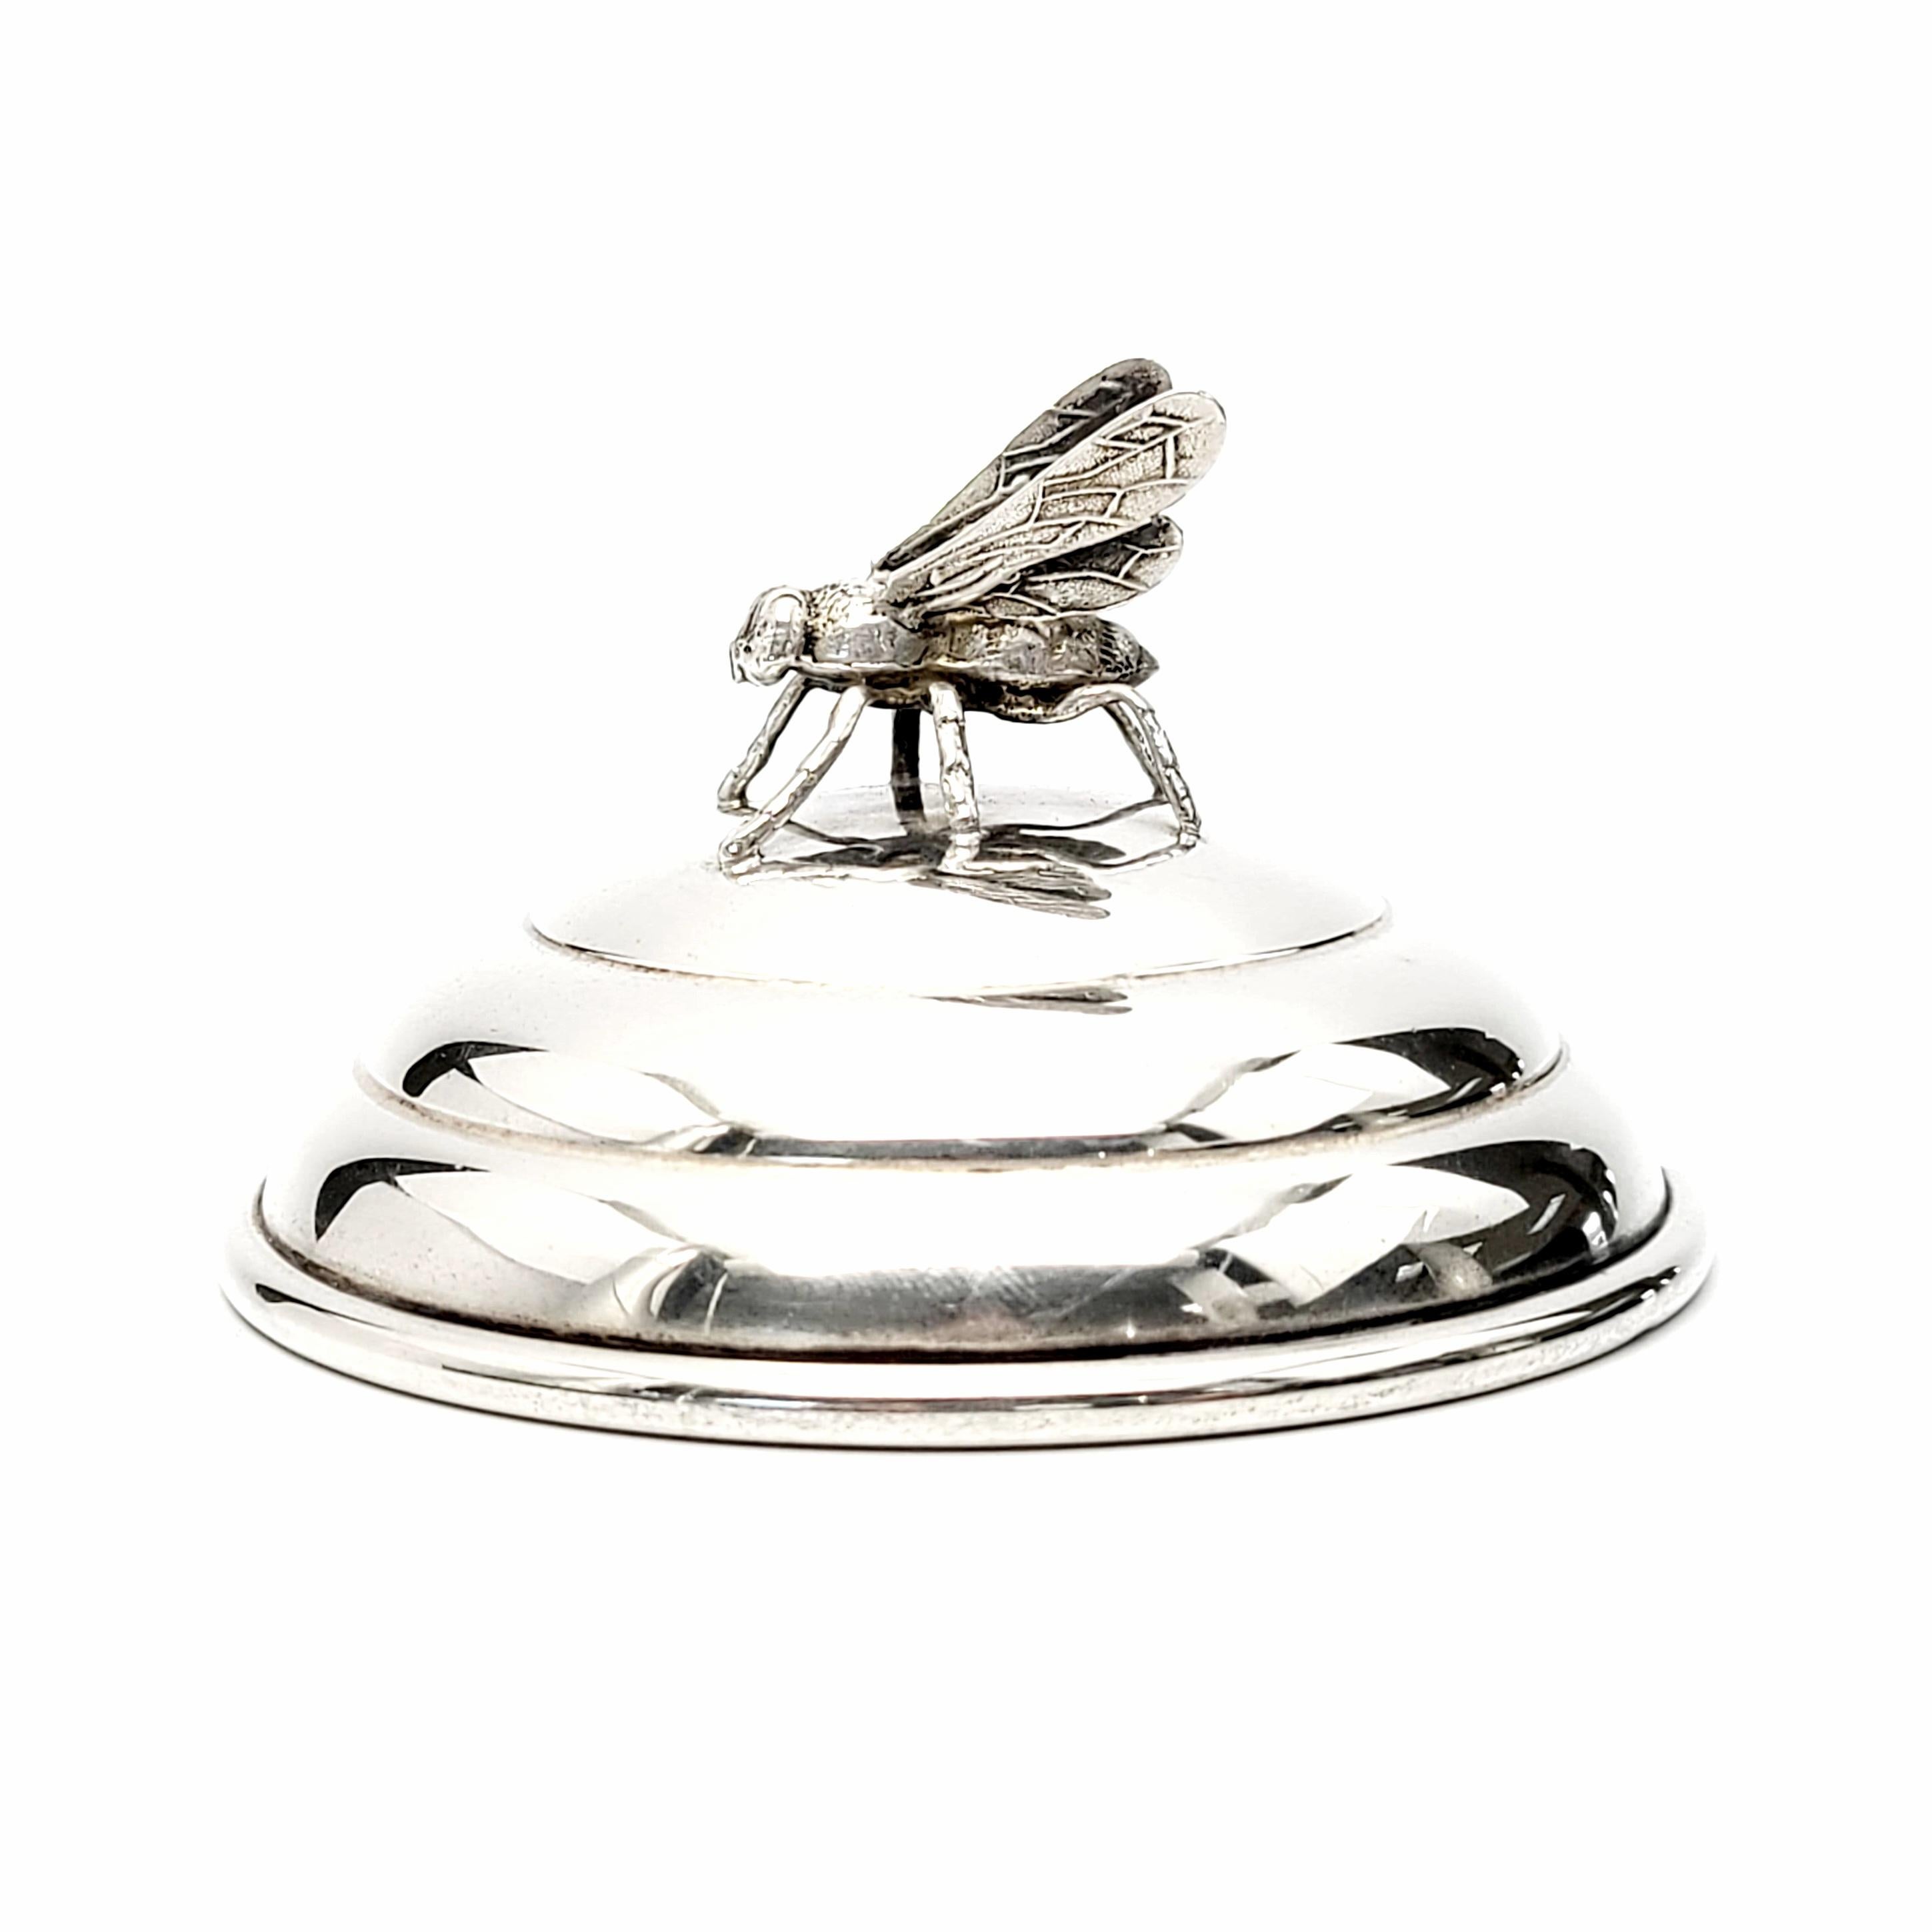 Antique sterling silver honey bee jar lid by R Blackinton & Co.

This lid is meant to top a glass honey jar. It features ribbed design to resemble a hive with a small hole for a spoon or honey stick. Topped with an intricately detailed honey